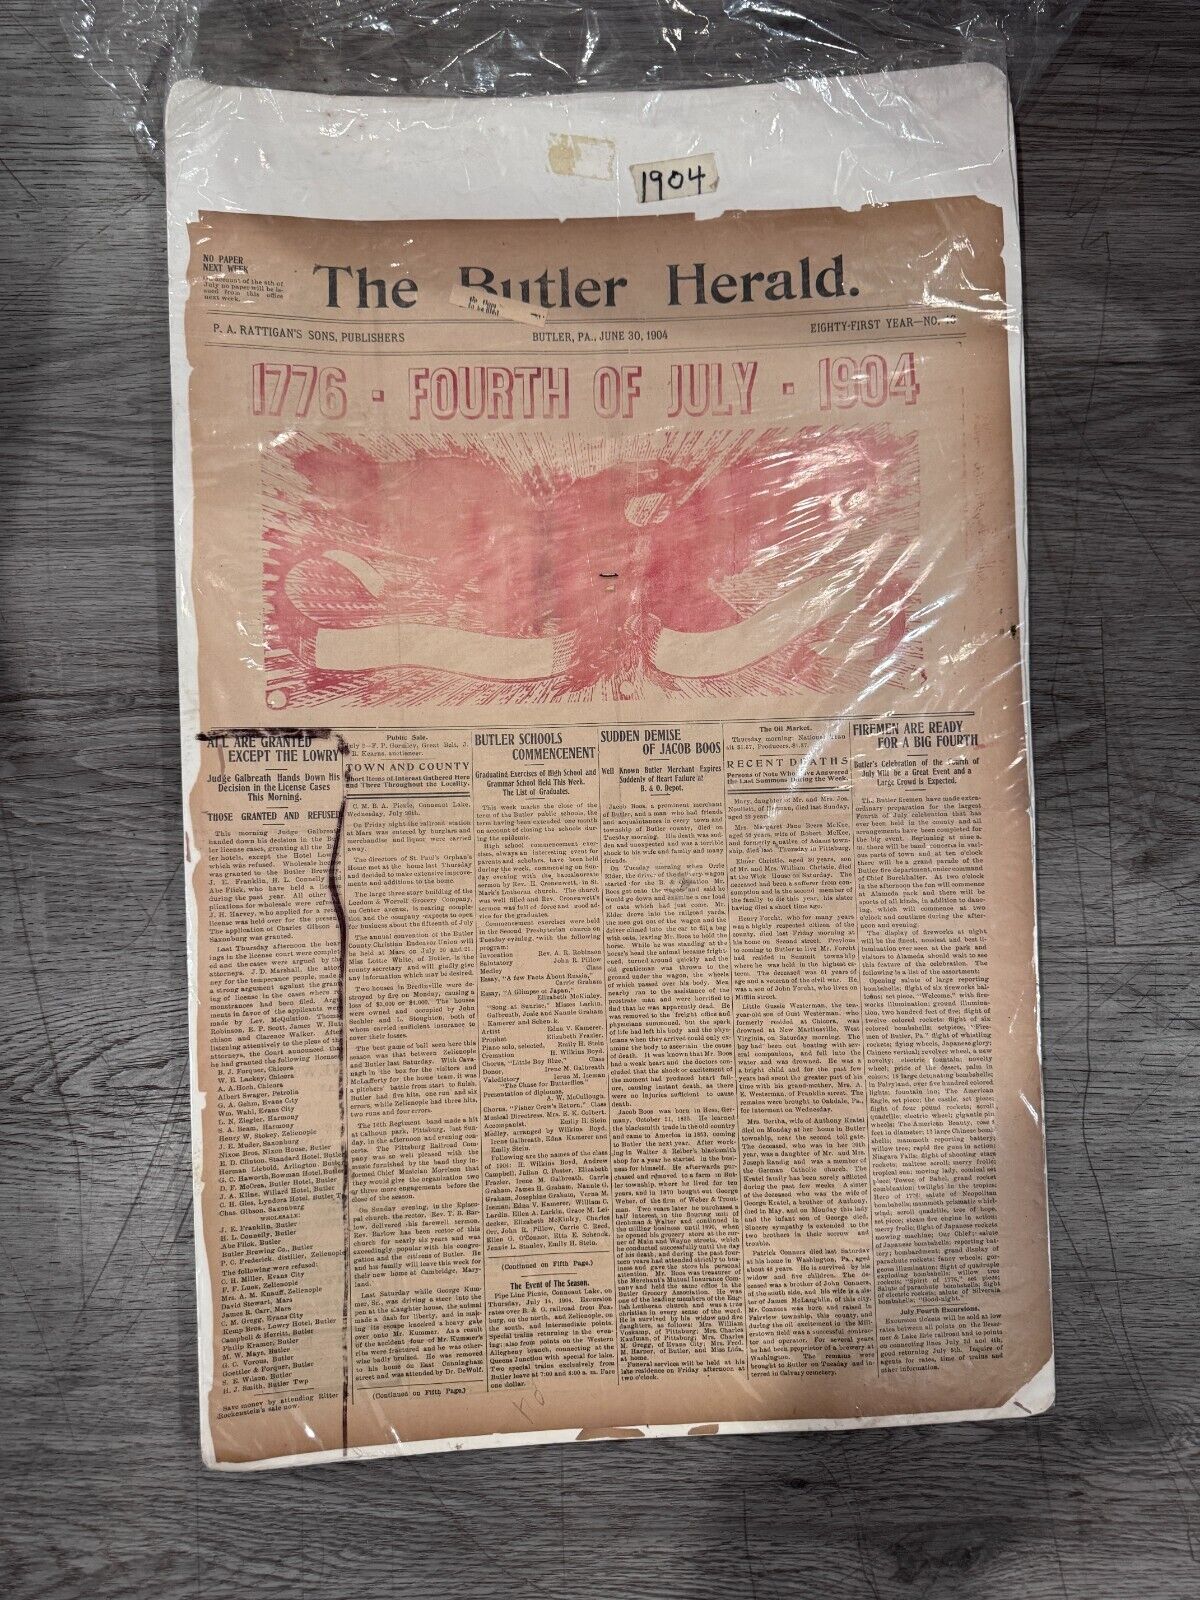 The Butler Herlald June 30th 1904 Fourth of July Newspaper